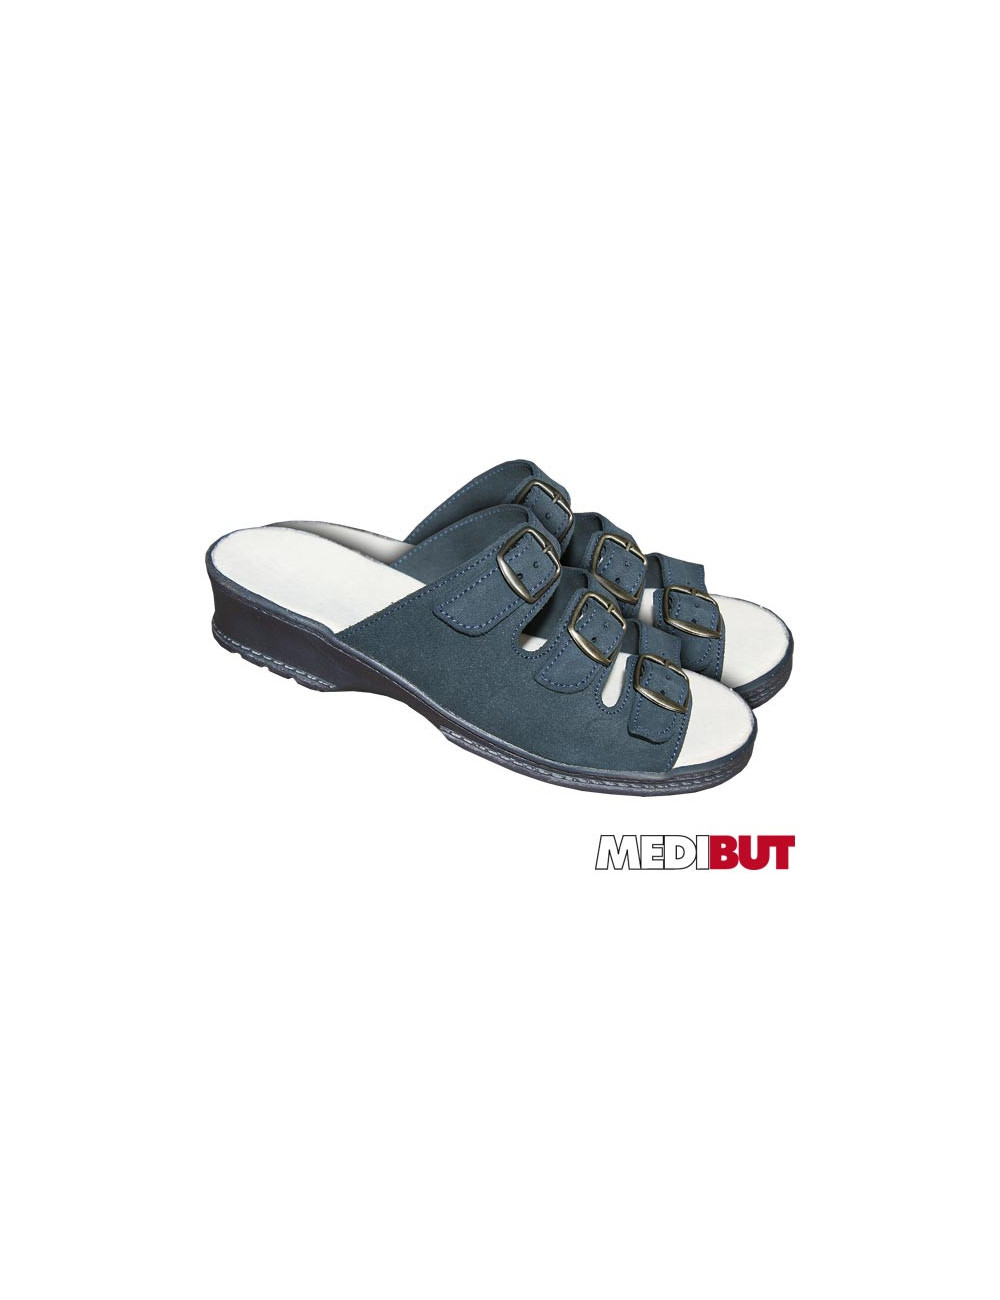 Occupational shoes bmbioform g navy Medibut